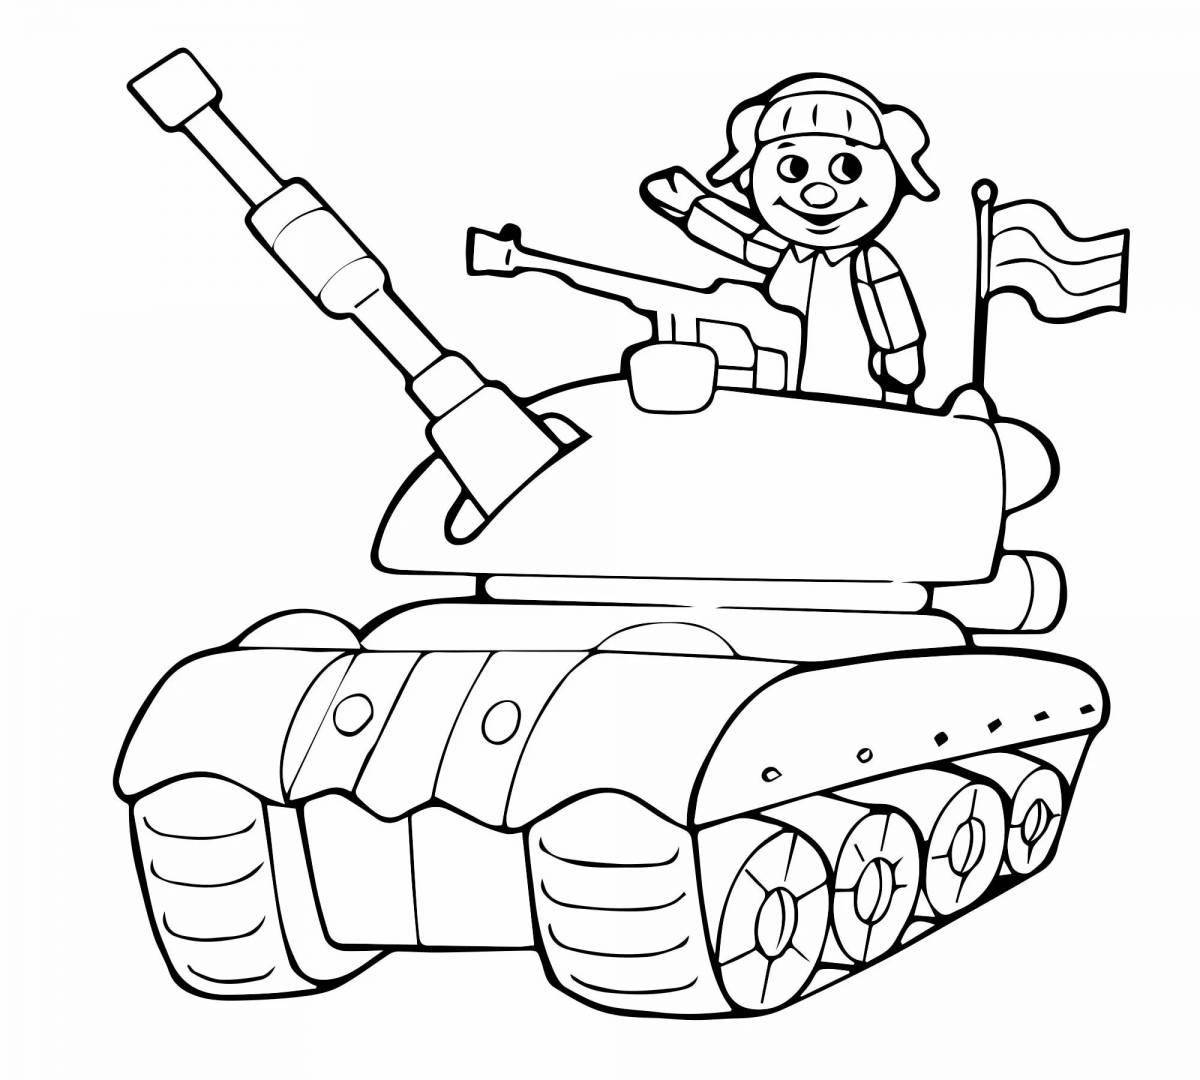 Fabulous tanks coloring for children 5 years old